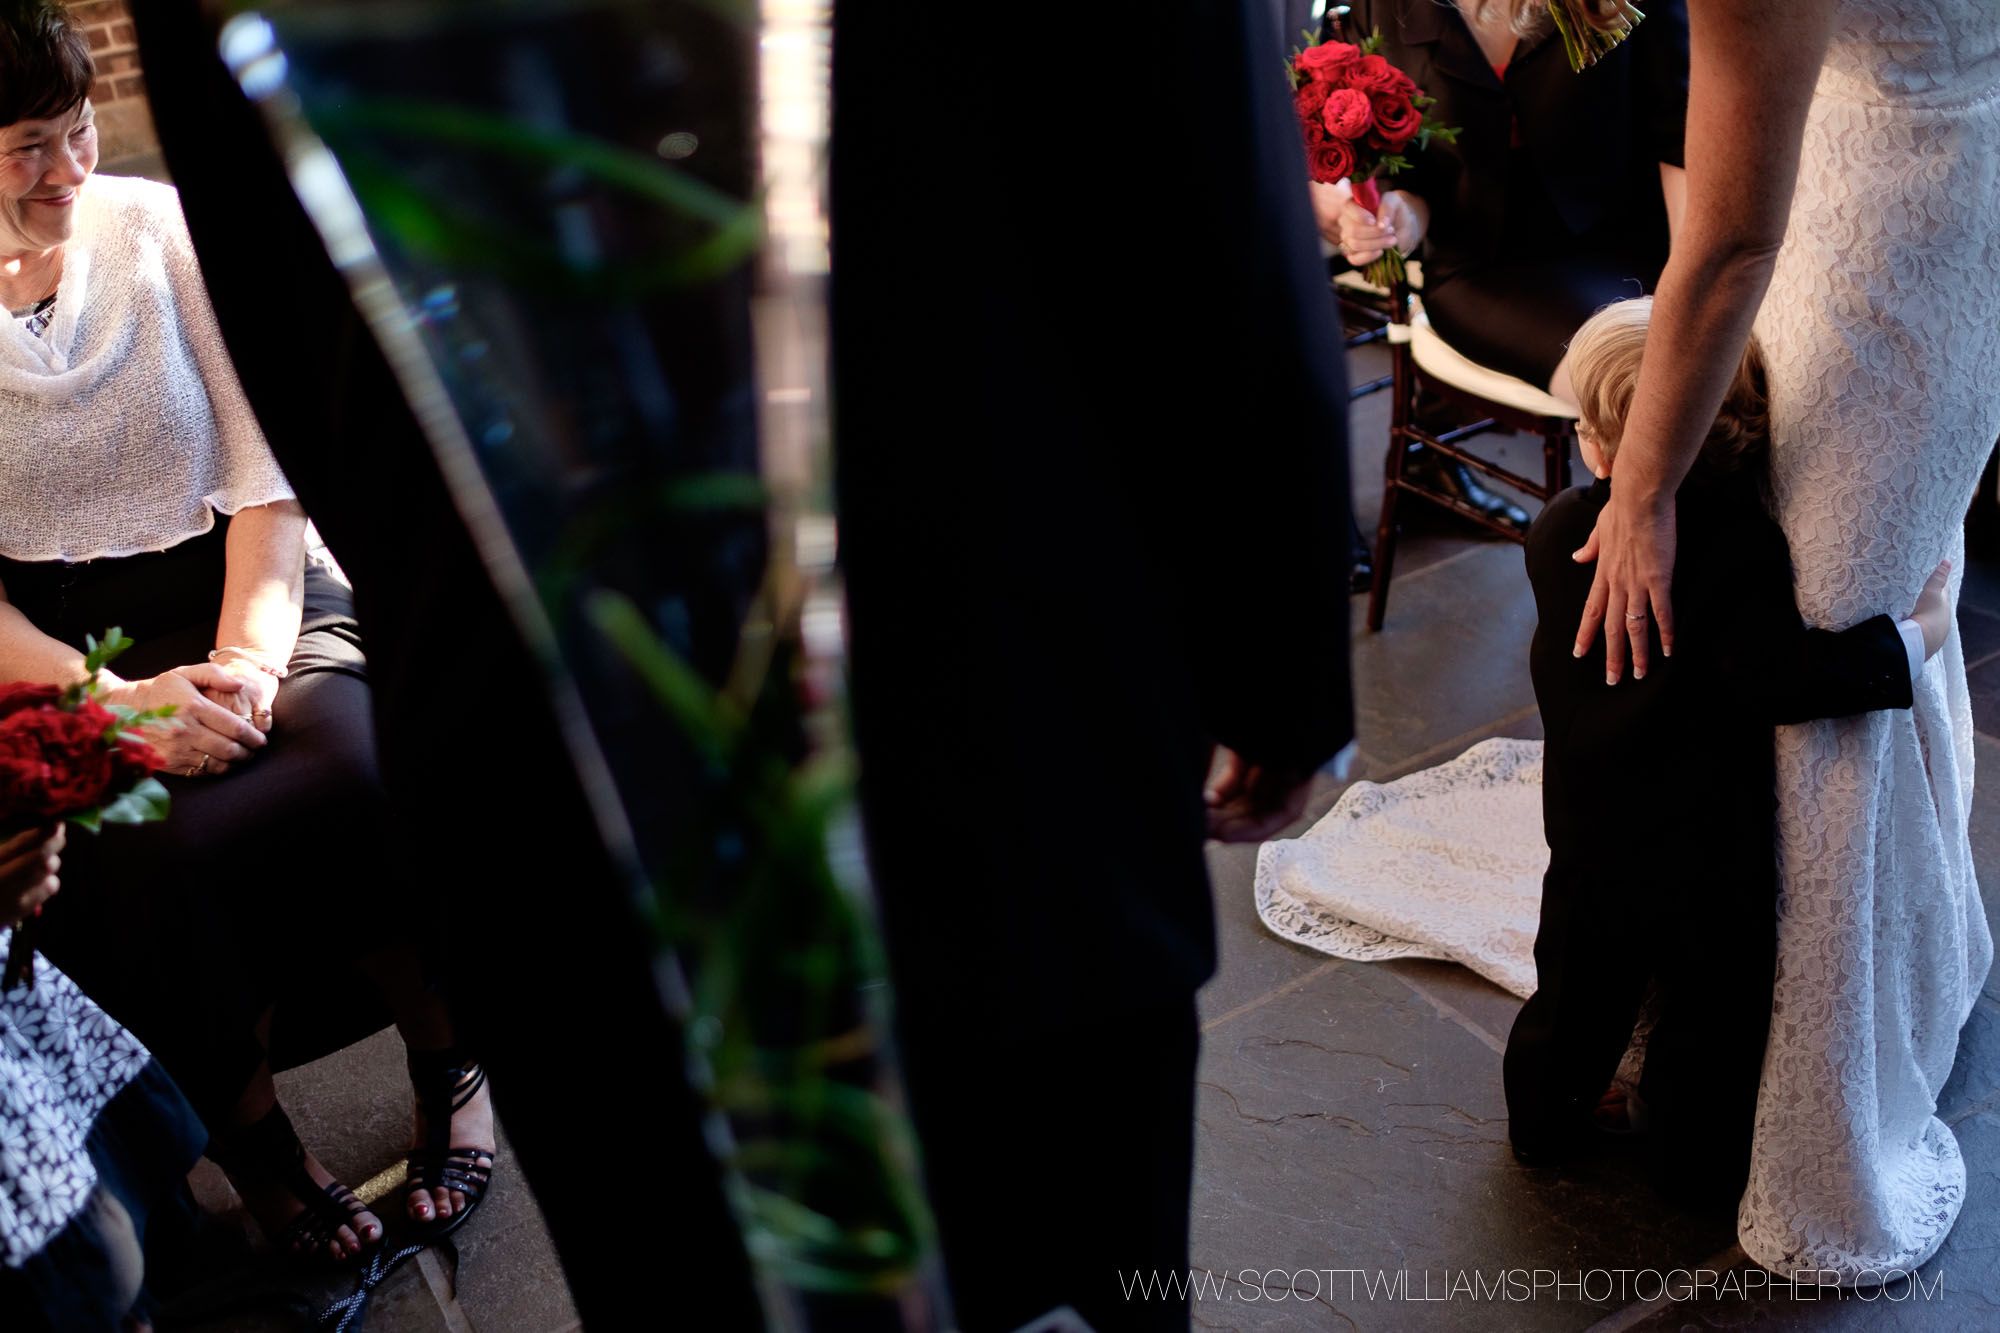  A photograph of the ring bearer holding onto the bride during the wedding ceremony during a smaller, intimate wedding at Langdon Hall in Cambridge, Ontario. 